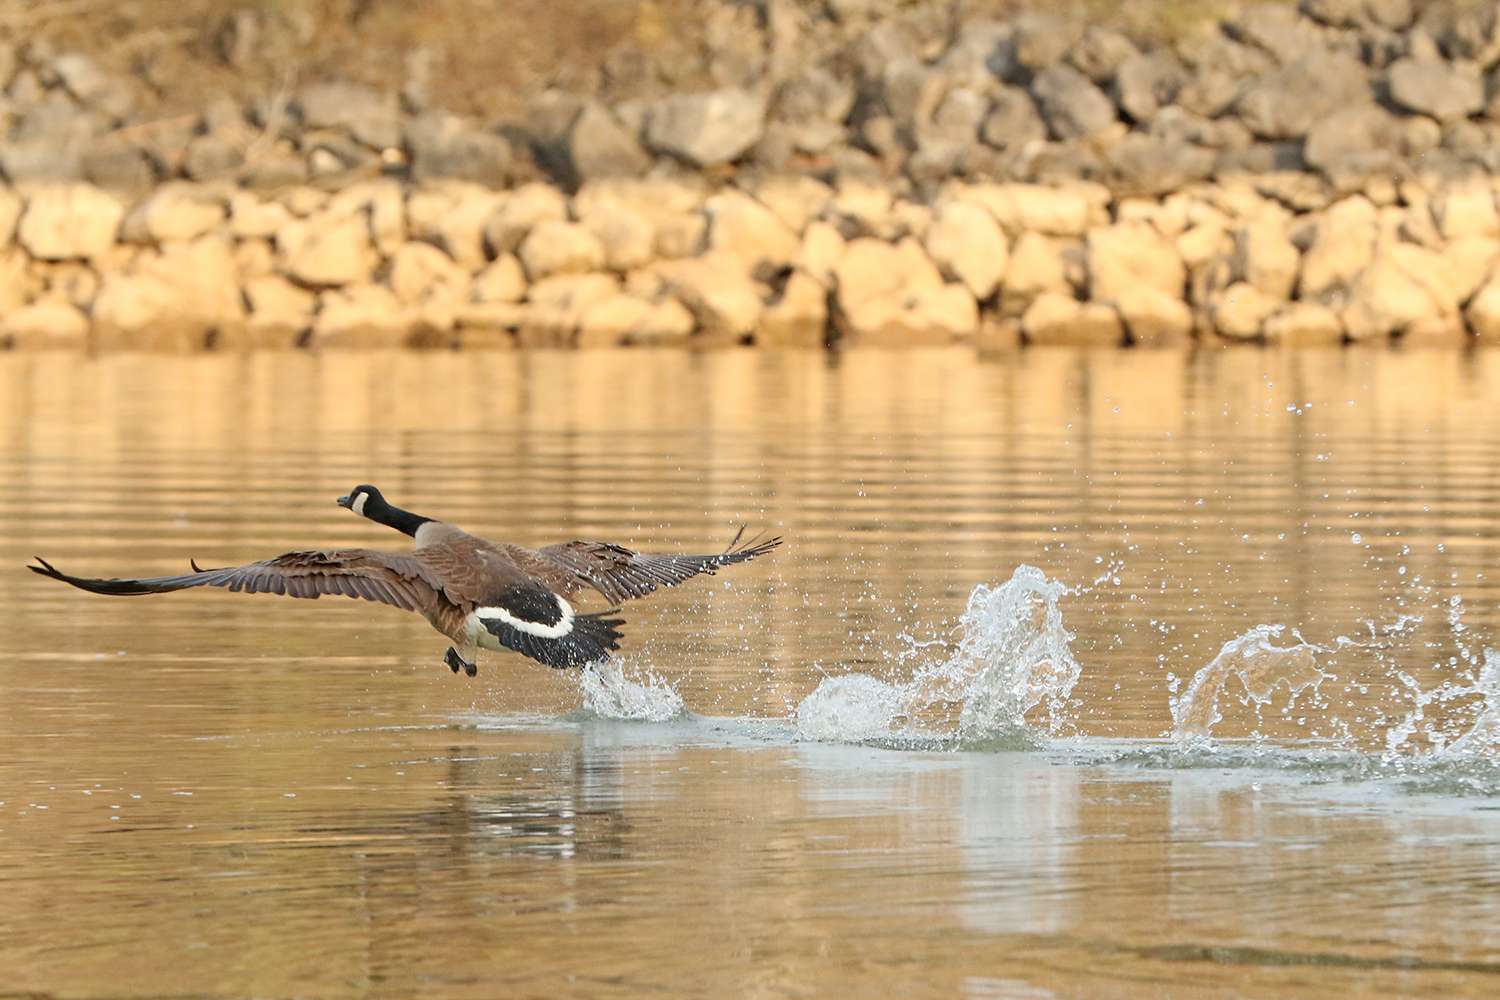 Canada goose taking flight at the 2019 Bassmaster Classic out of Knoxville, Tenn.